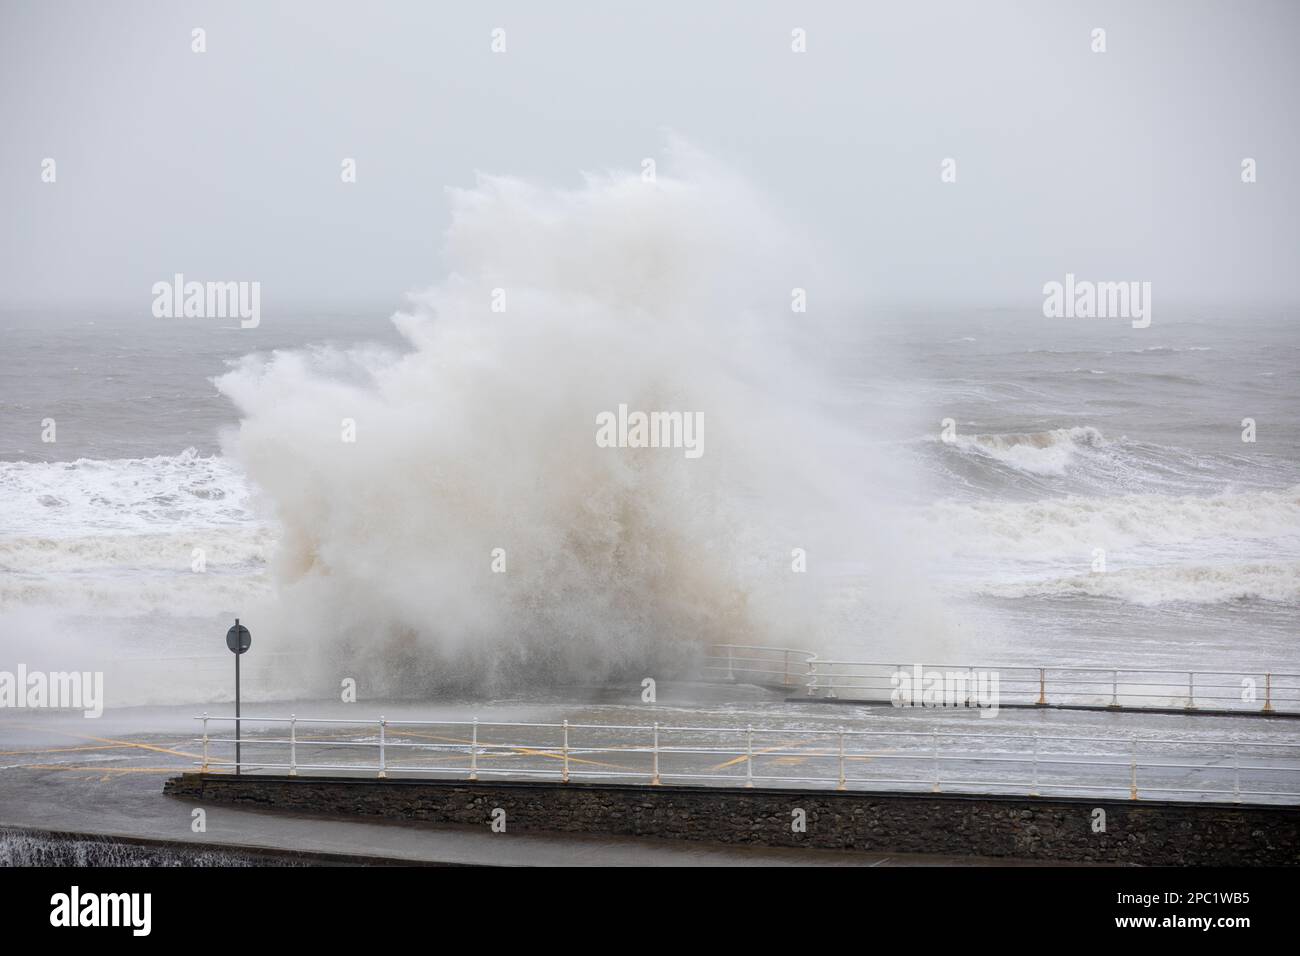 Aberystwyth, Ceredigion, Wales, UK. 13th March 2023 UK Weather: Strong winds, combined with incoming high tide brings large crashing waves along Aberystwyth sea defences this morning. © Ian Jones/Alamy Live News Stock Photo